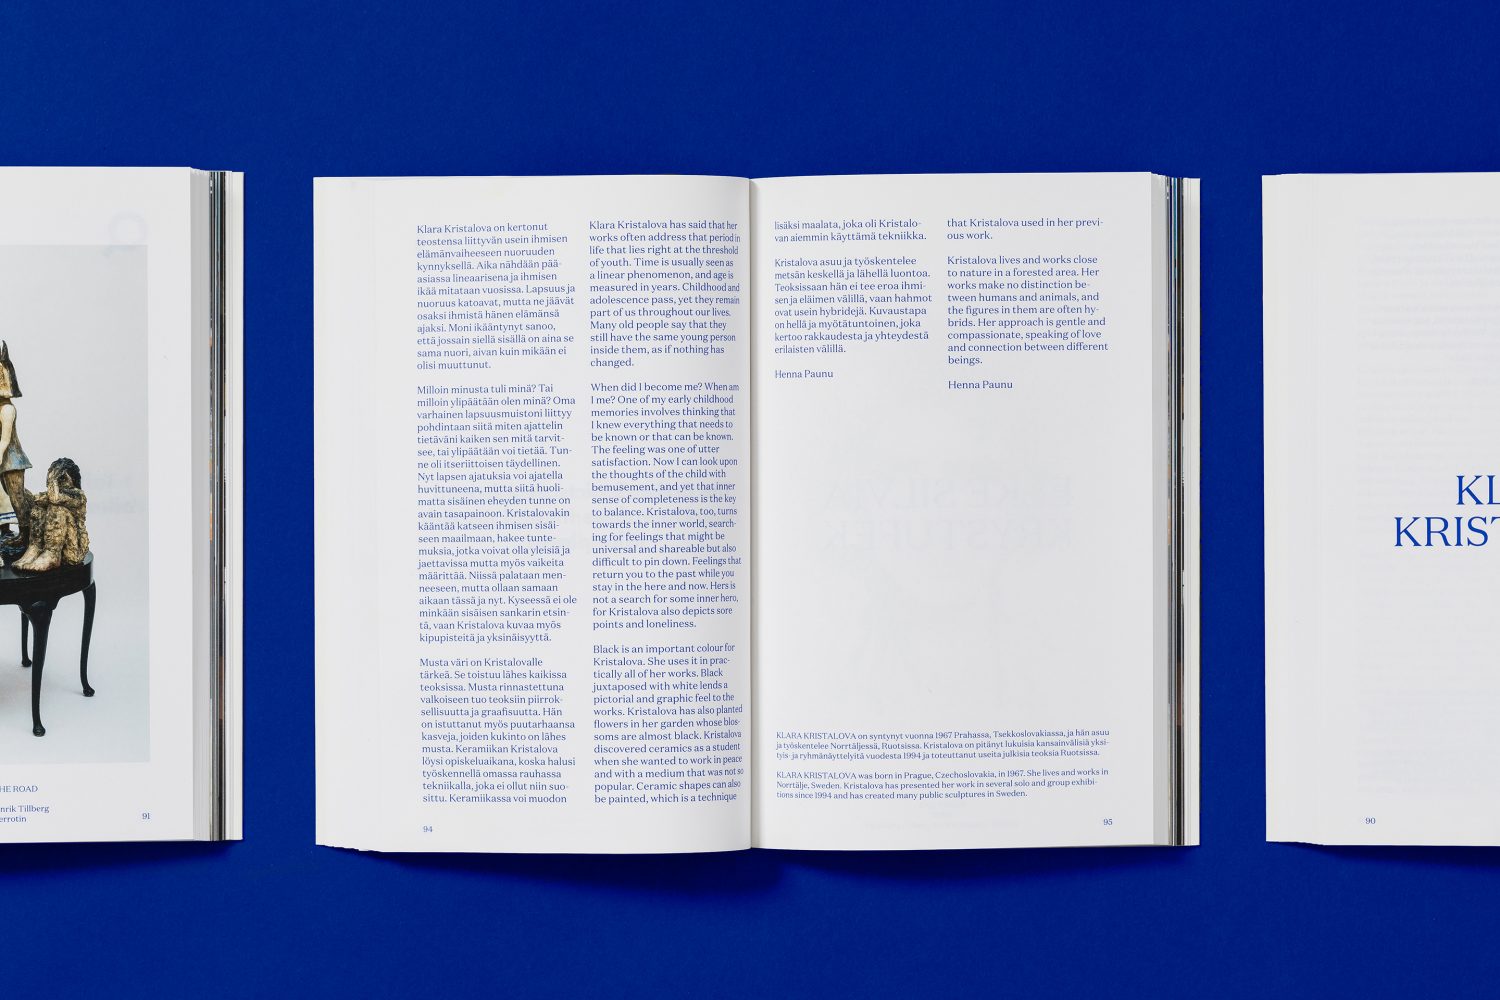 Brand identity and book designed by Helsinki-based Werklig for EMMA exhibition series In Search Of The Present